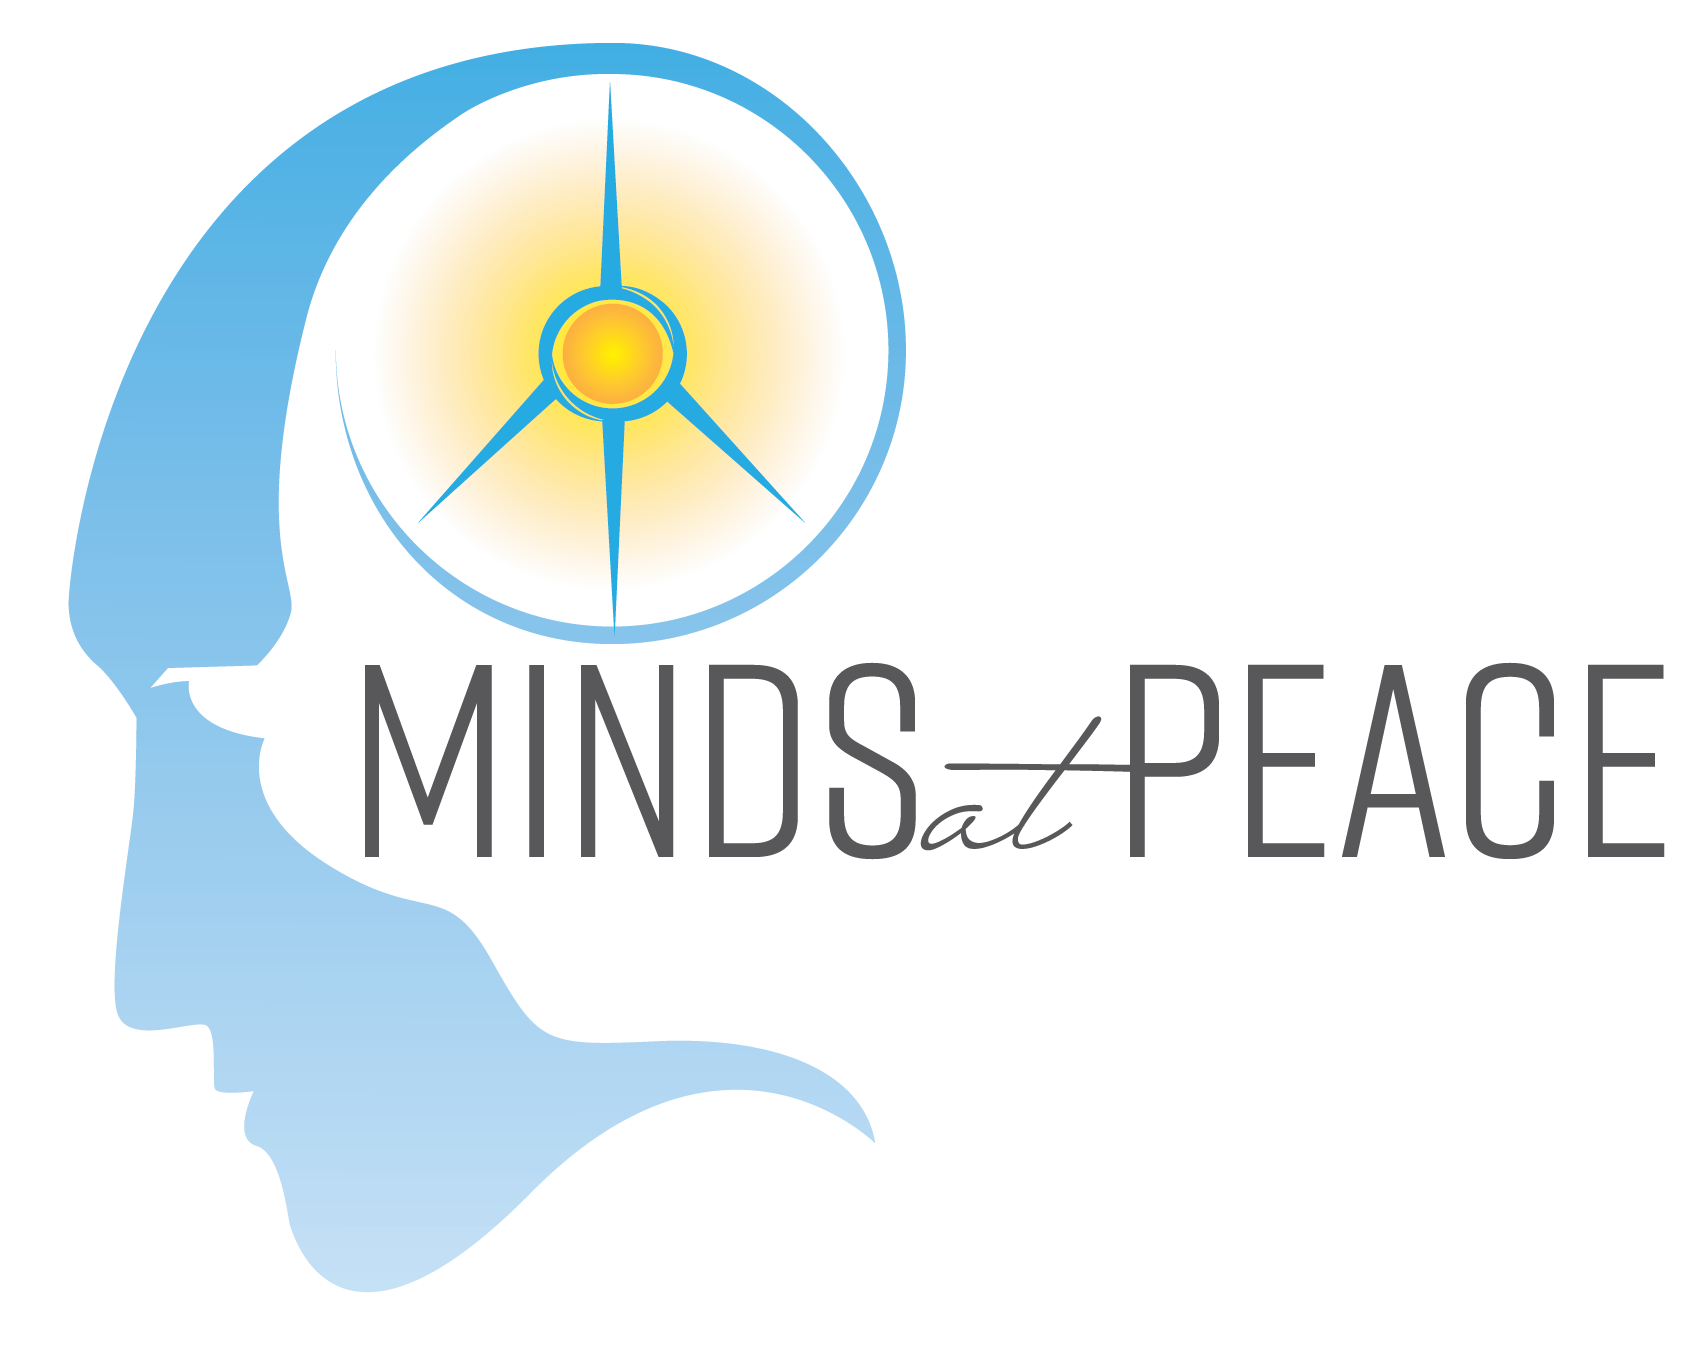 Minds at Peace